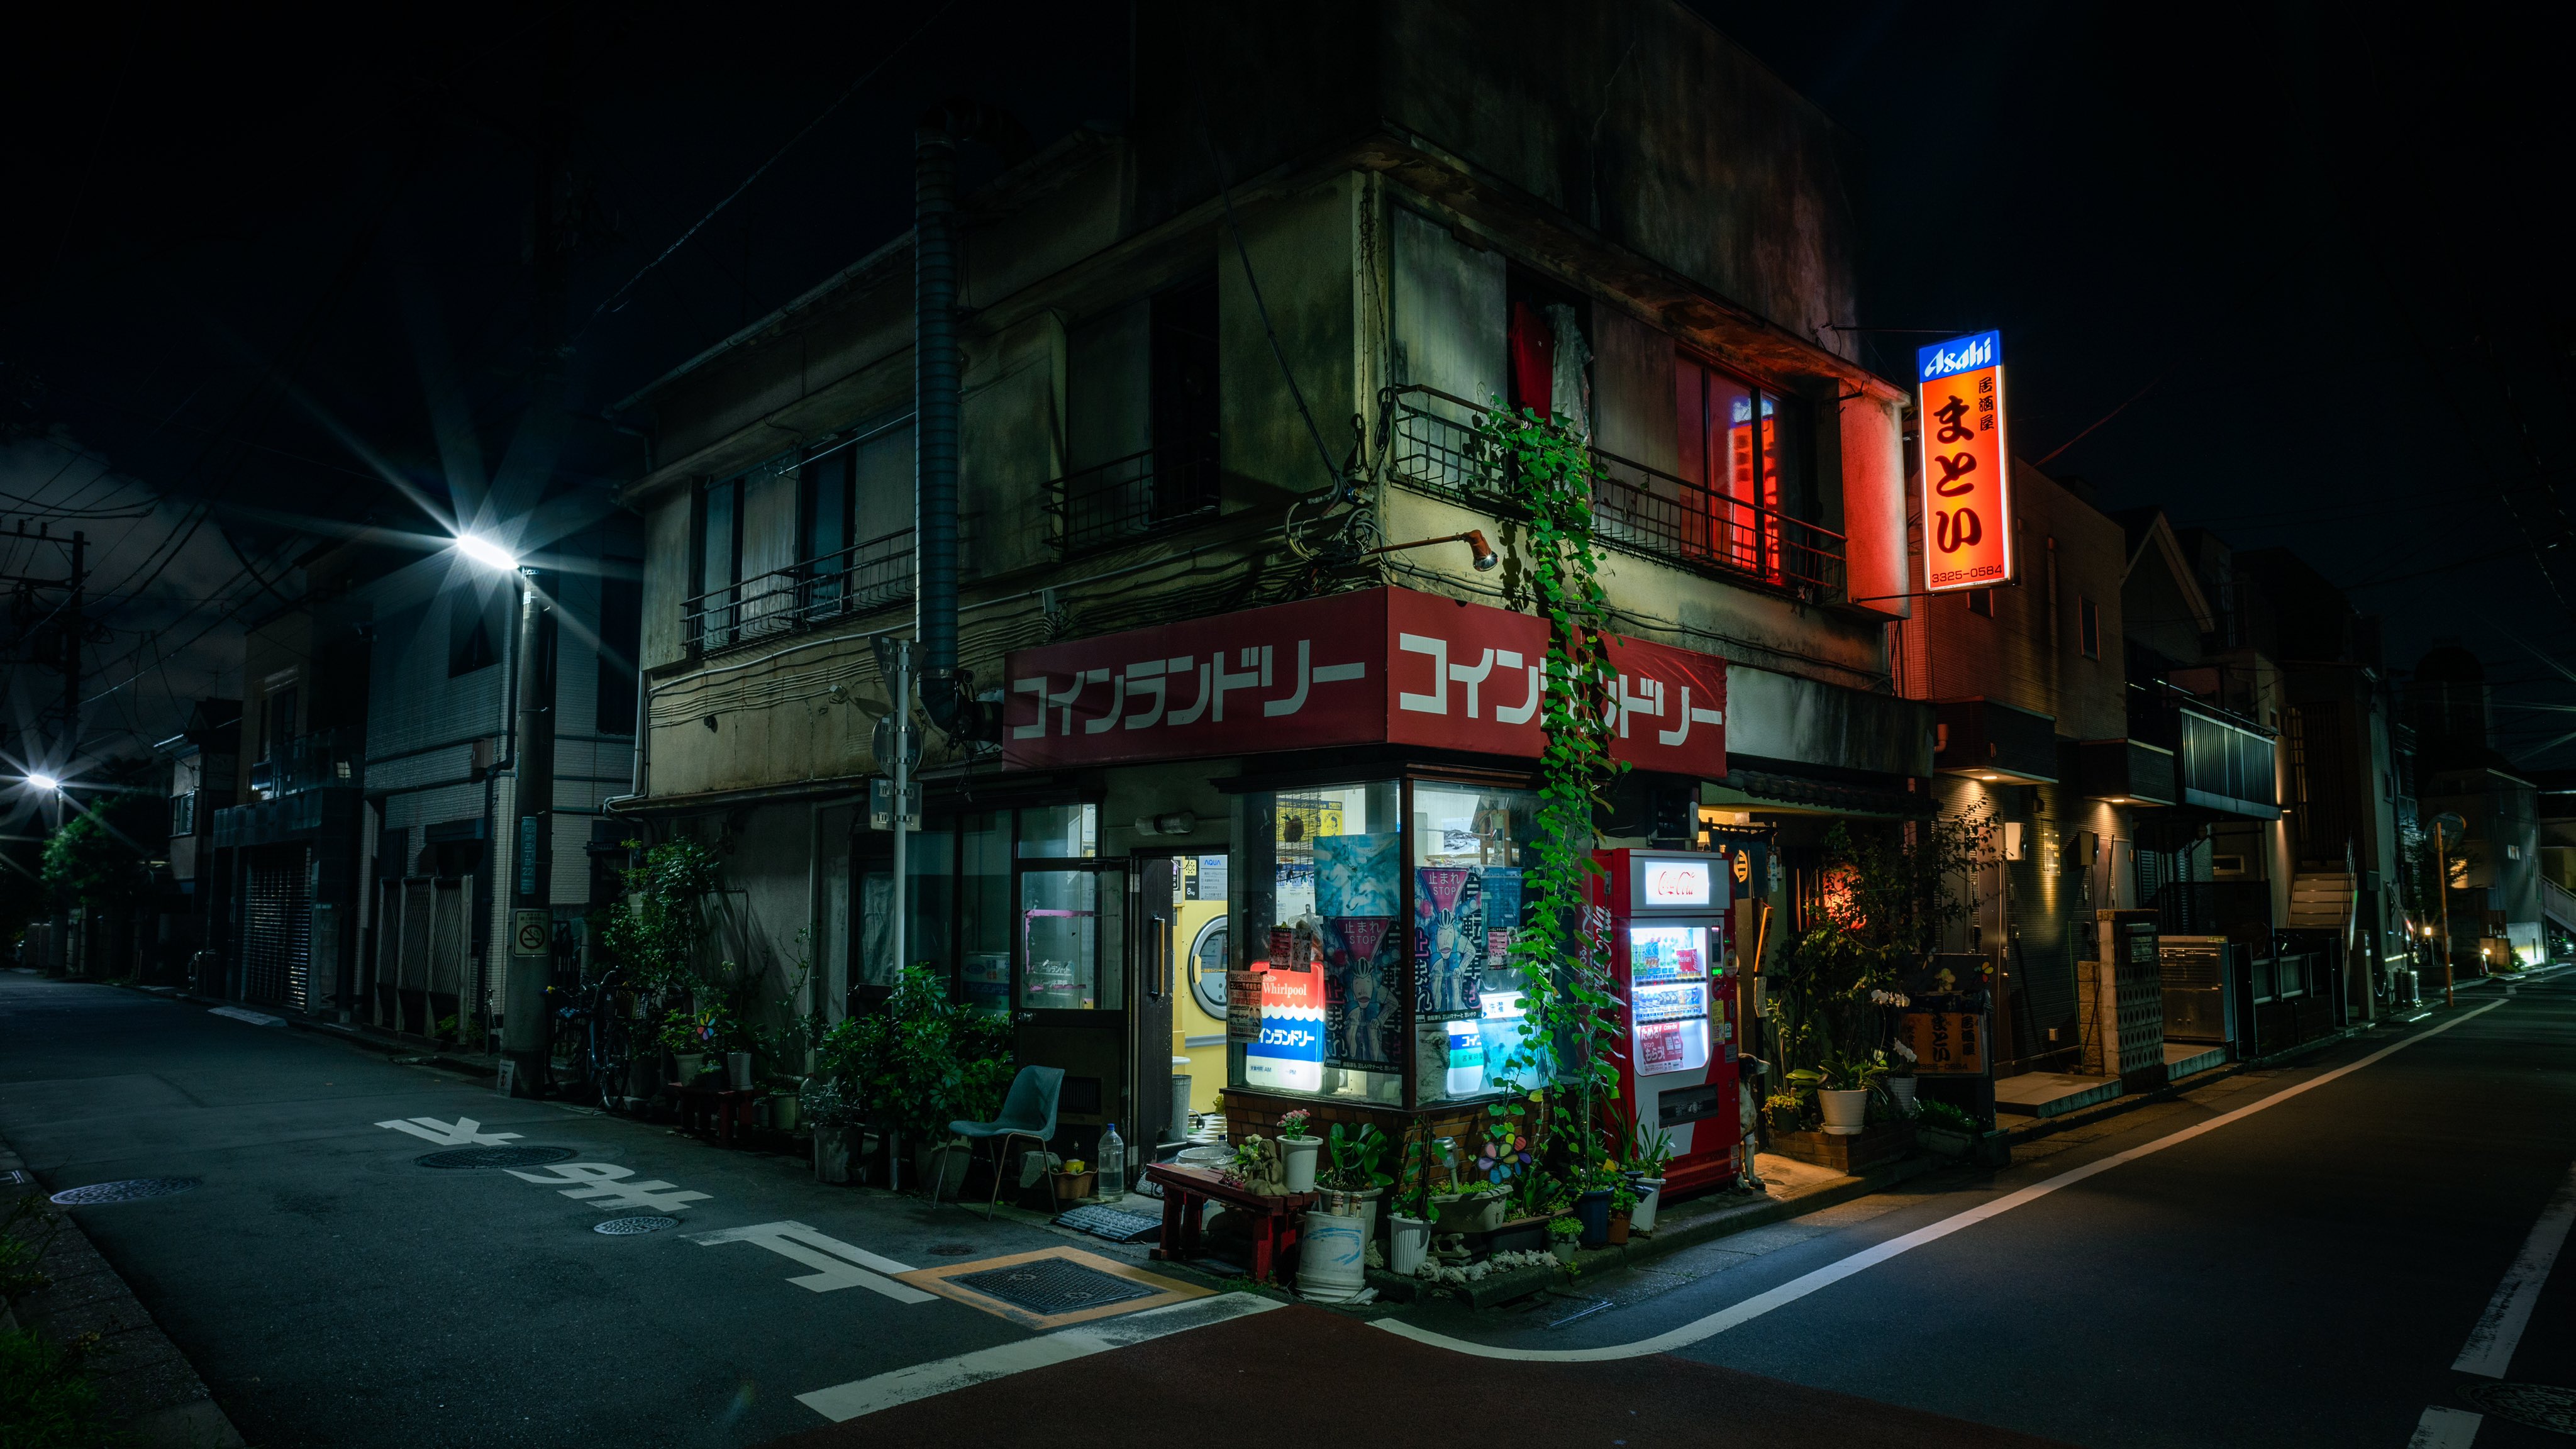 General 4096x2304 city katakana street night neon lights urban stores plants store front street light Japanese chair building dog leaves animals power lines vending machine sign water bottle drink numbers